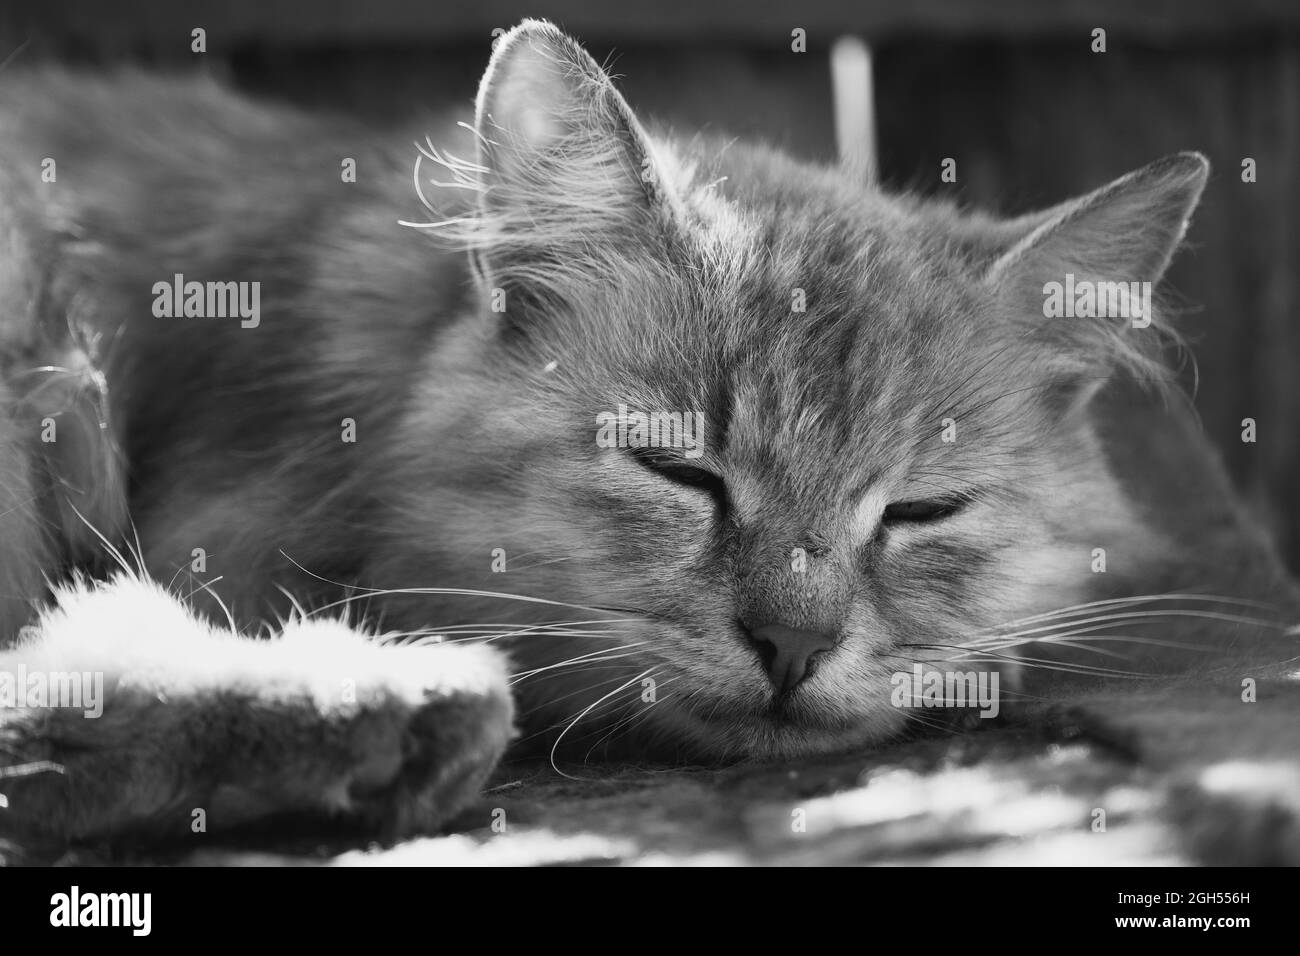 Muzzle of a sleeping gray cat, close-up. Portrait of a sleeping domestic cat. Stock Photo